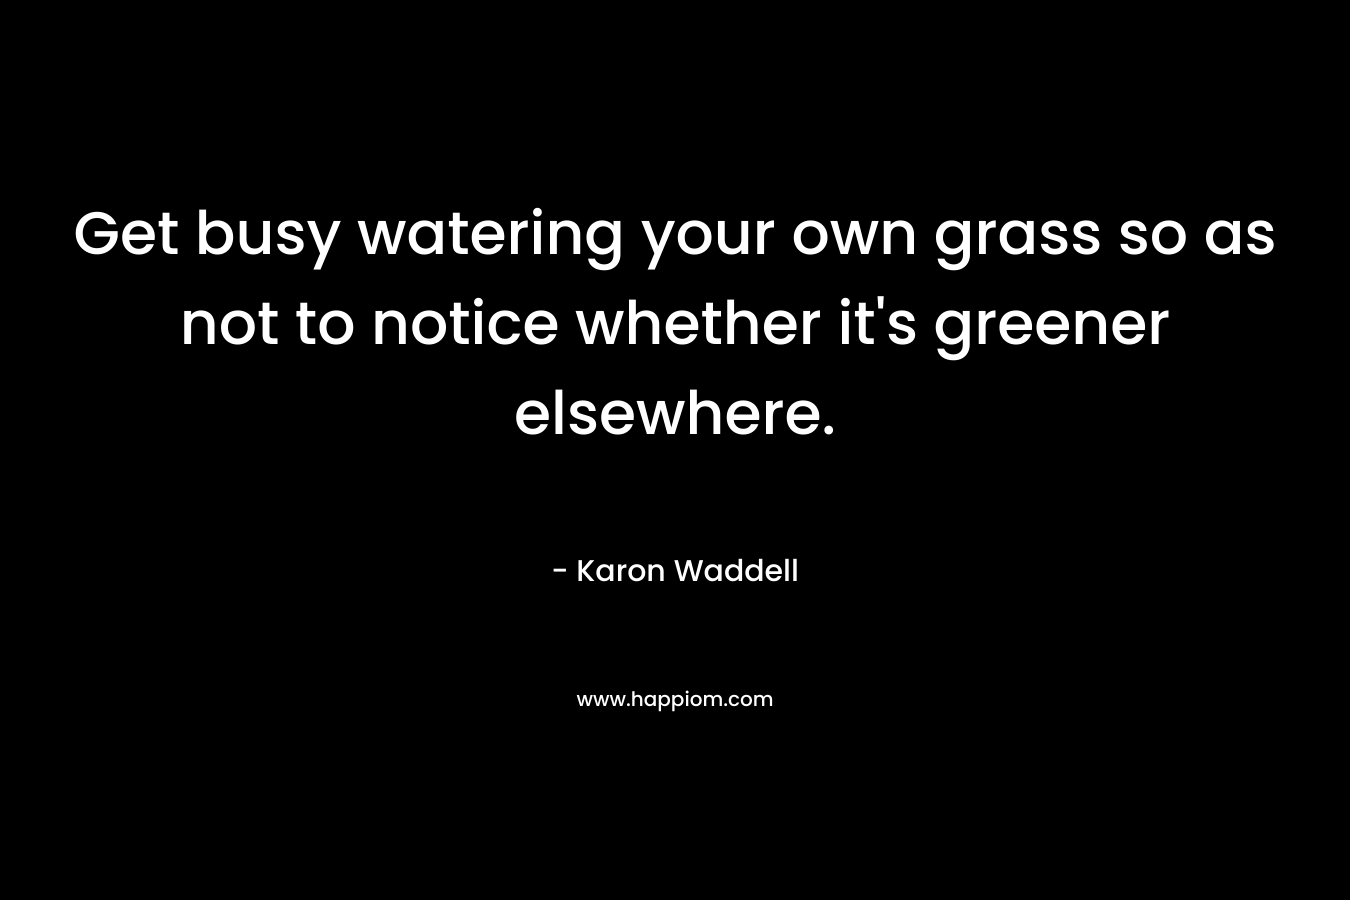 Get busy watering your own grass so as not to notice whether it’s greener elsewhere. – Karon Waddell